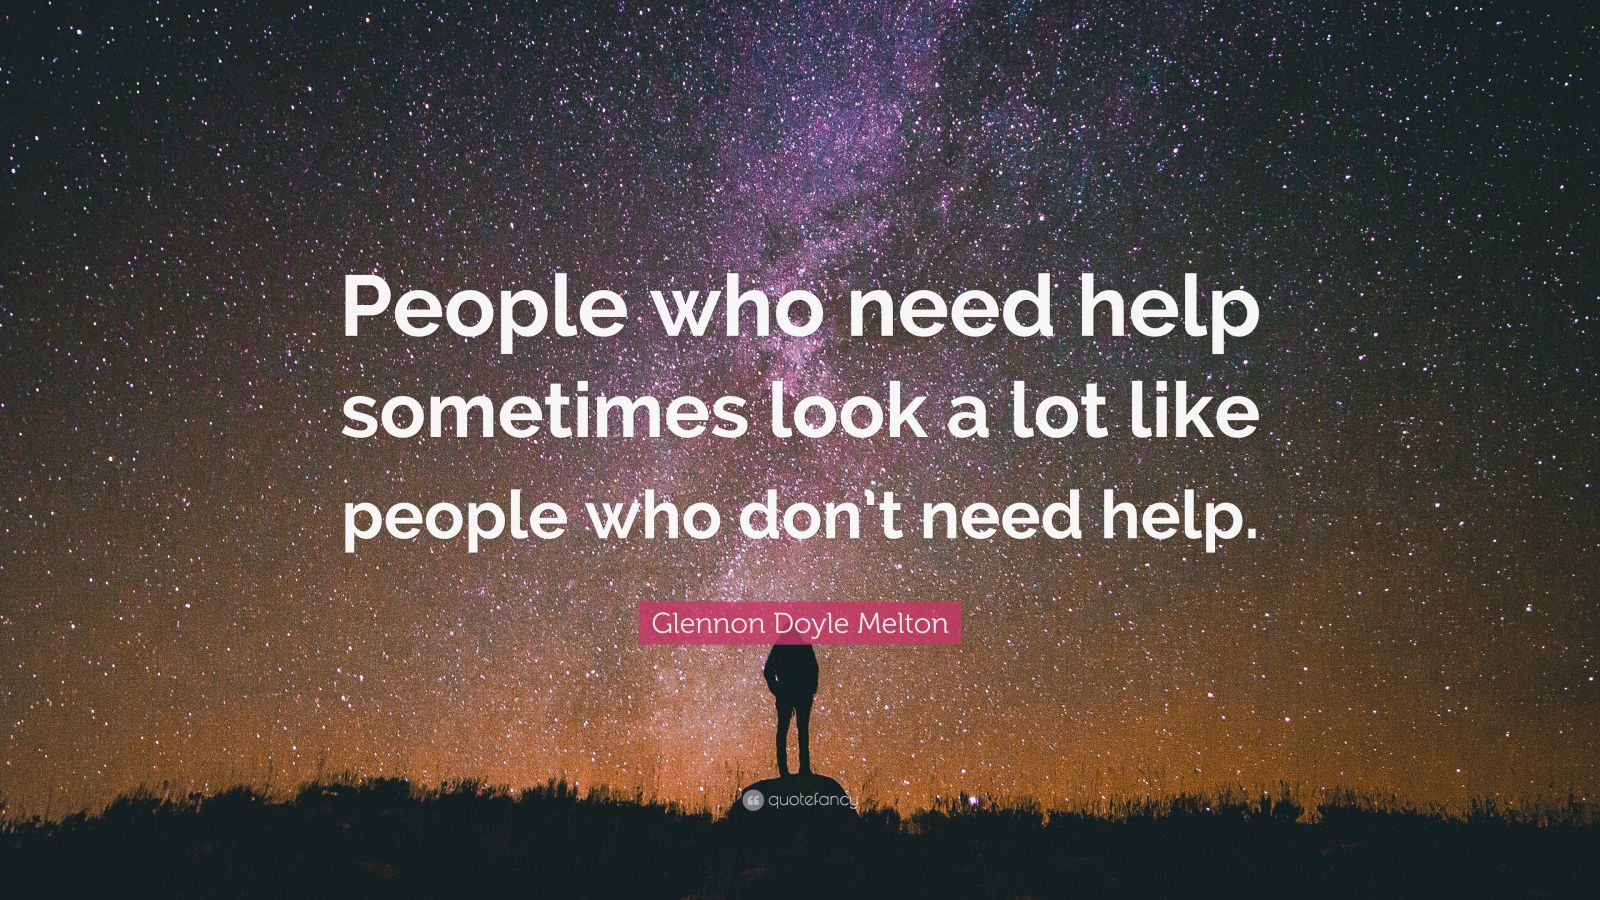 Glennon Doyle Melton Quote: “People who need help sometimes look a lot